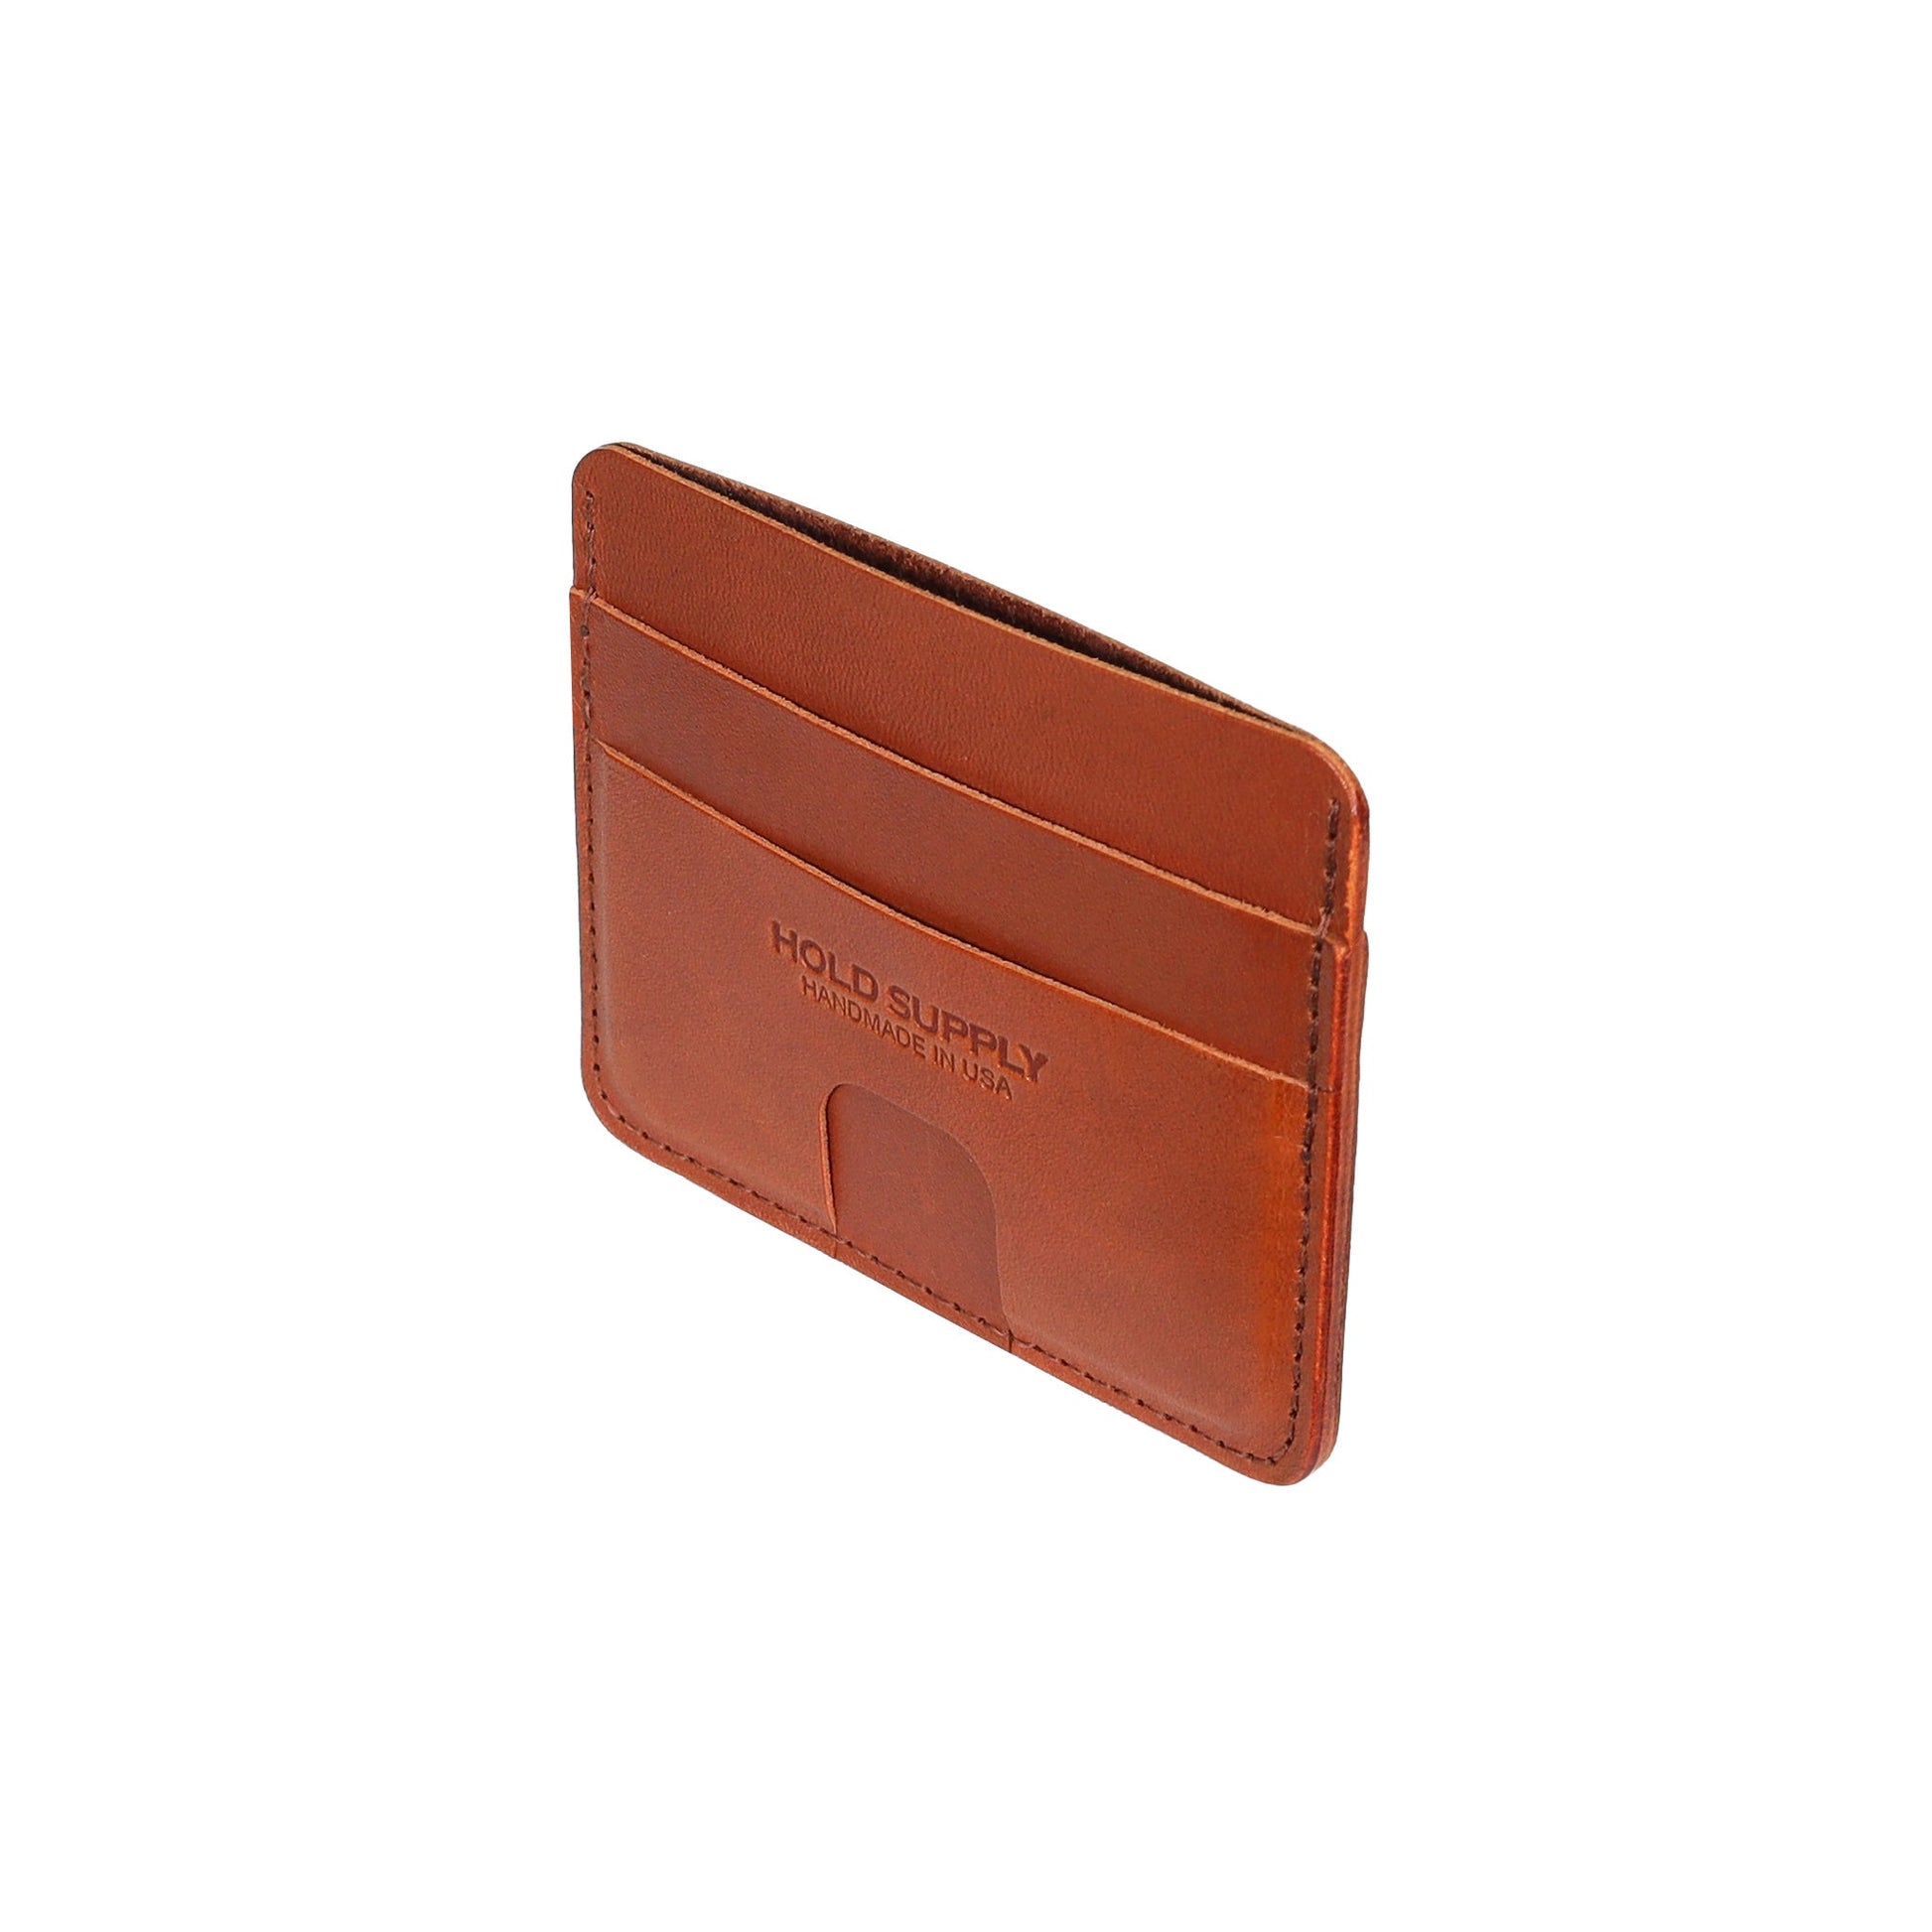 The Tanned Cow- Minimalist Card Holder Wallet Men, Black, Card